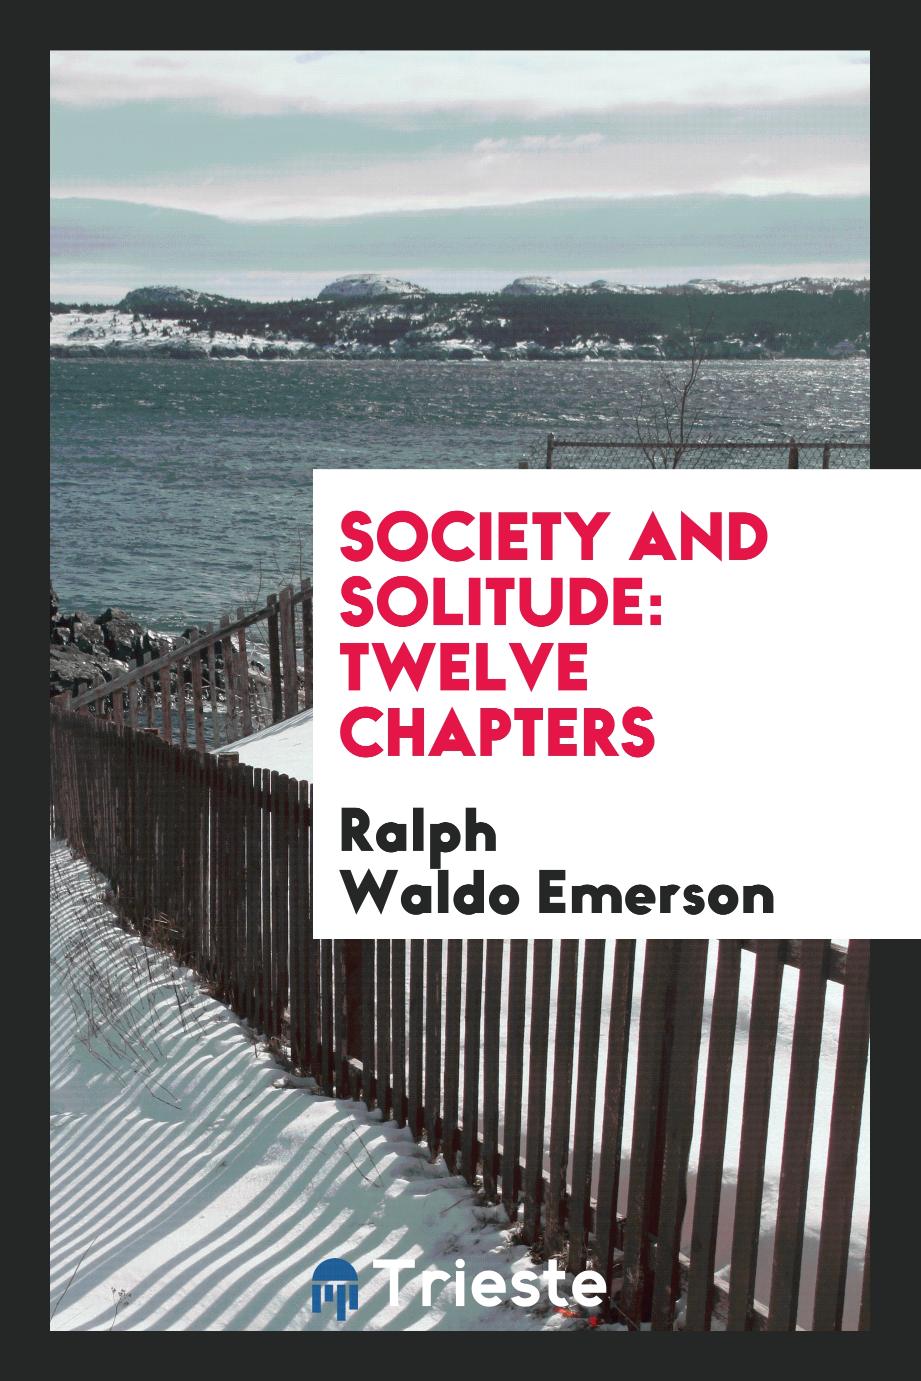 Society and Solitude: twelve chapters